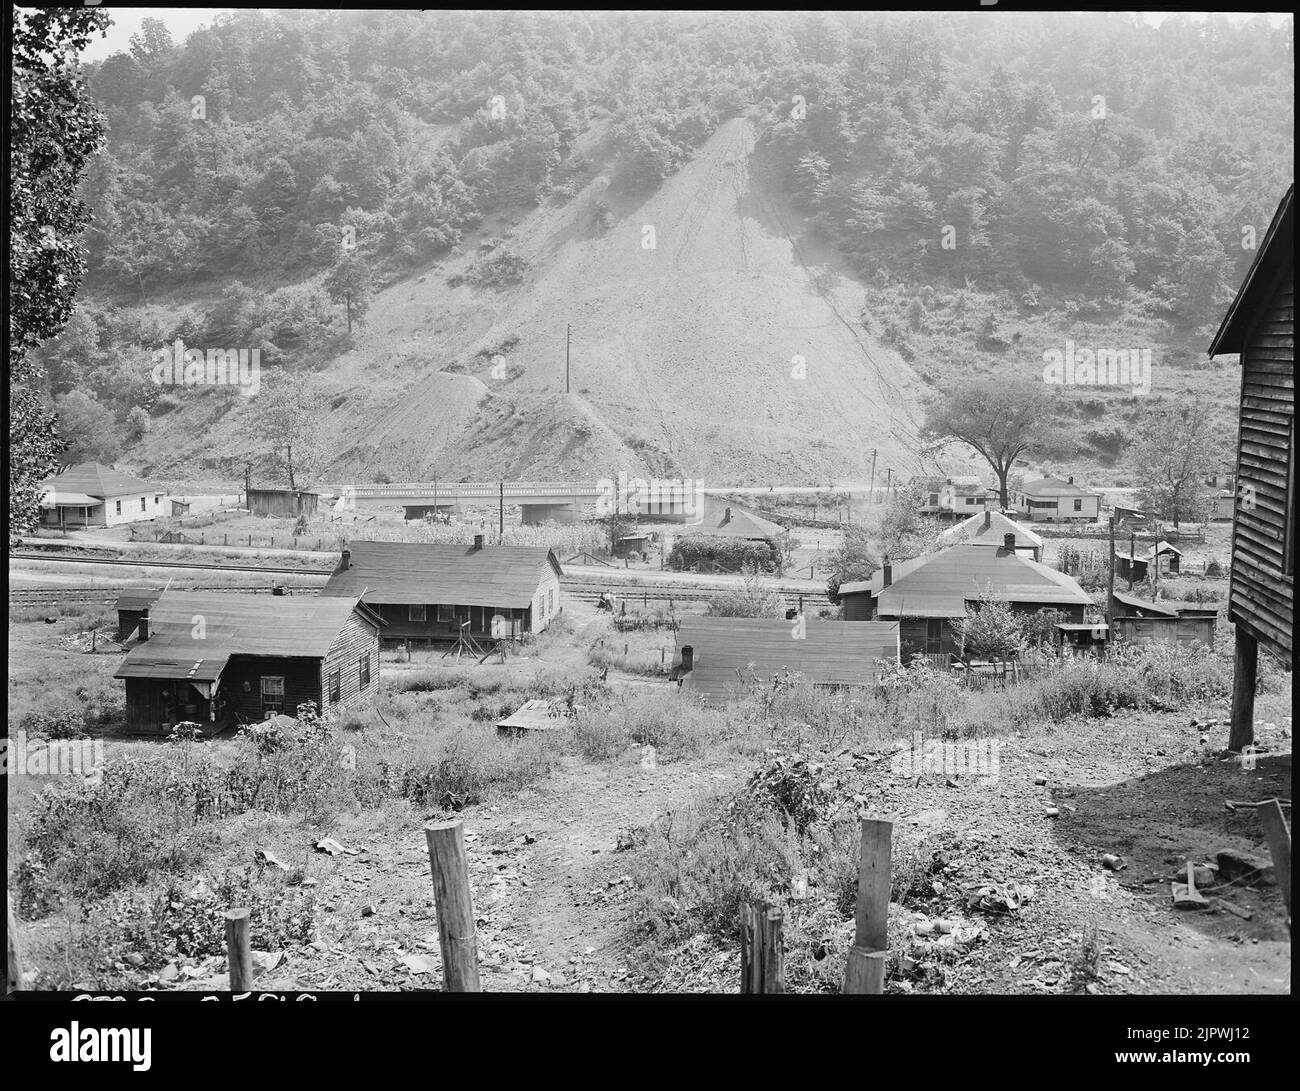 The view from the Sergent's front porch. P V & K Coal Company, Clover Gap Mine, Lejunior, Harlan County, Kentucky. Stock Photo